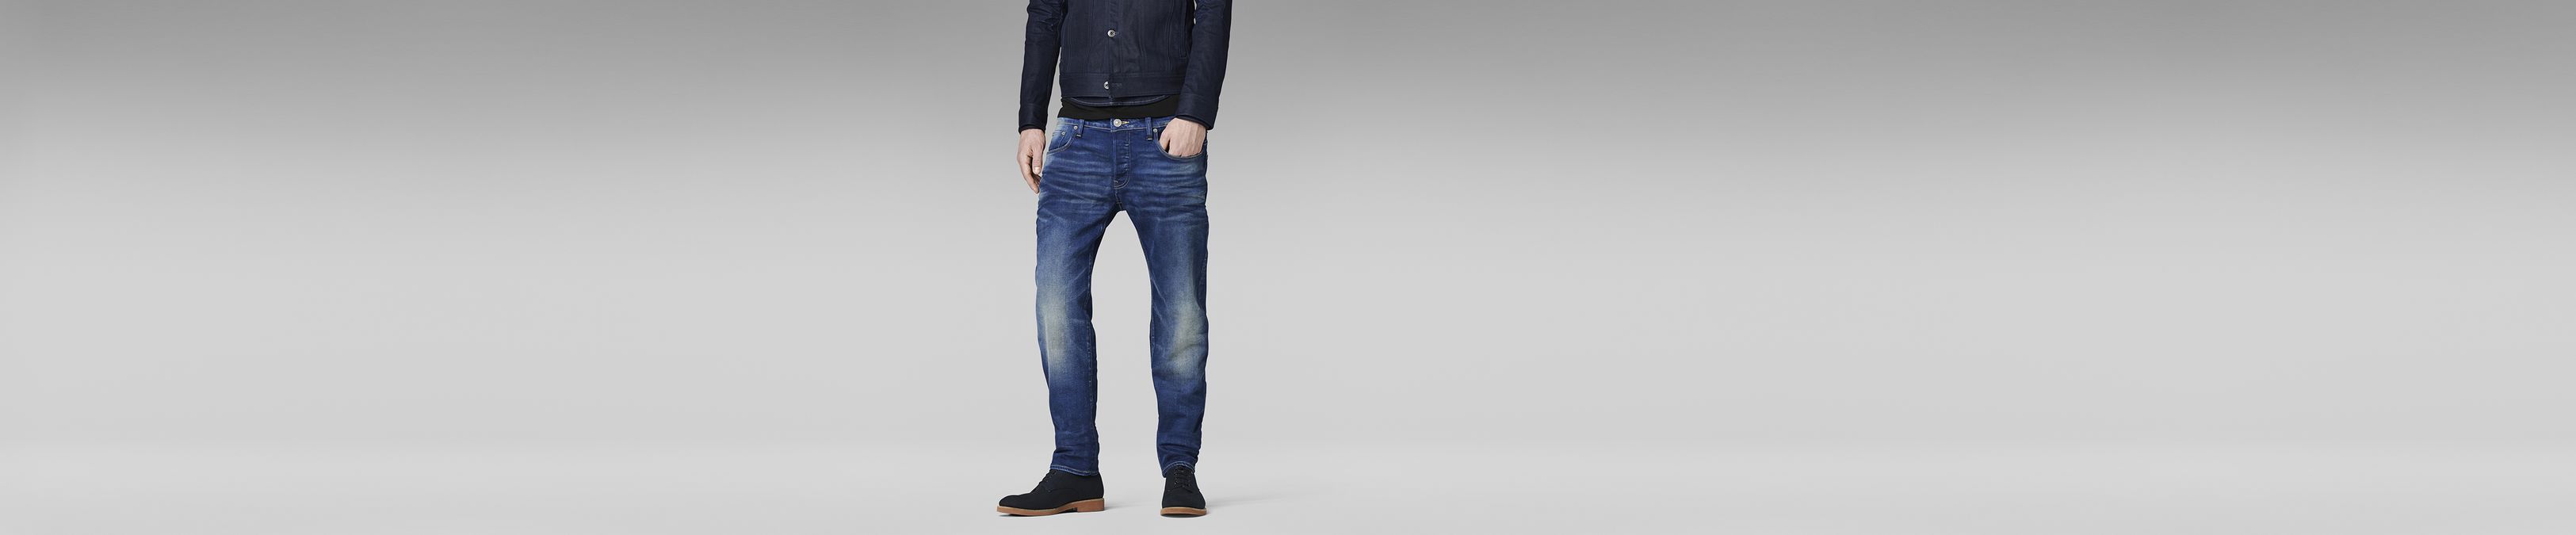 g star raw 3301 low tapered